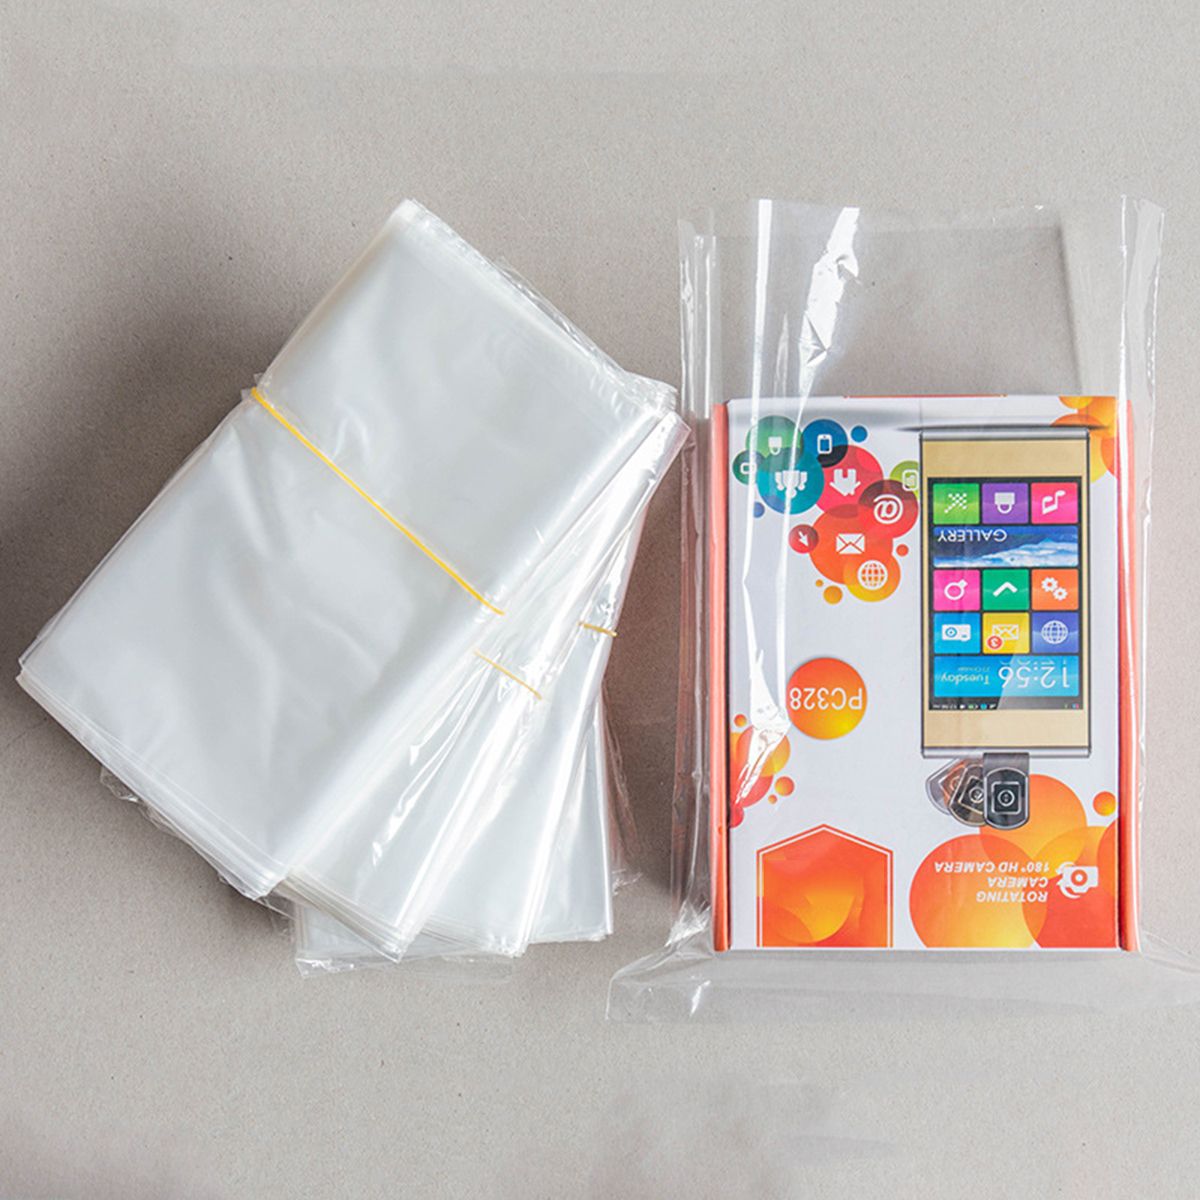 50Pcs-14x20-Inch-POF-Shrink-Film-Wrap-Bags-Transparent-Clear-Heat-Seal-Package-Bags-1149722